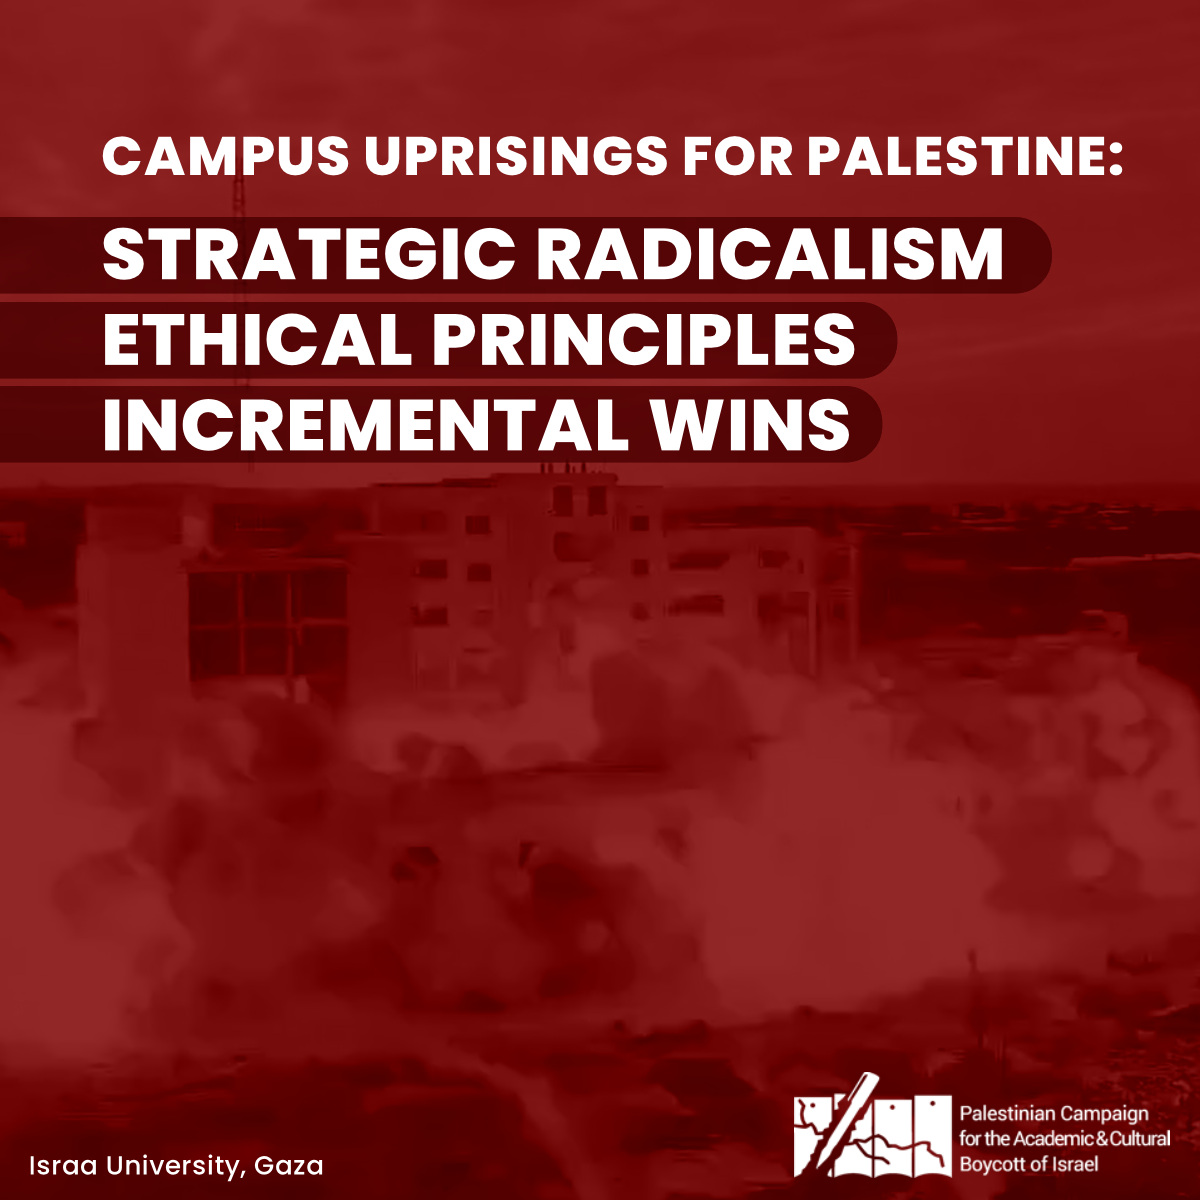 Strategic radicalism calls on the campus mobilizations to employ multiple tactics that take local contexts into account to mutually build on and amplify each other. A strategic and incremental win for one campus is a win for all. Read the full statement: loom.ly/K8wqw4Y